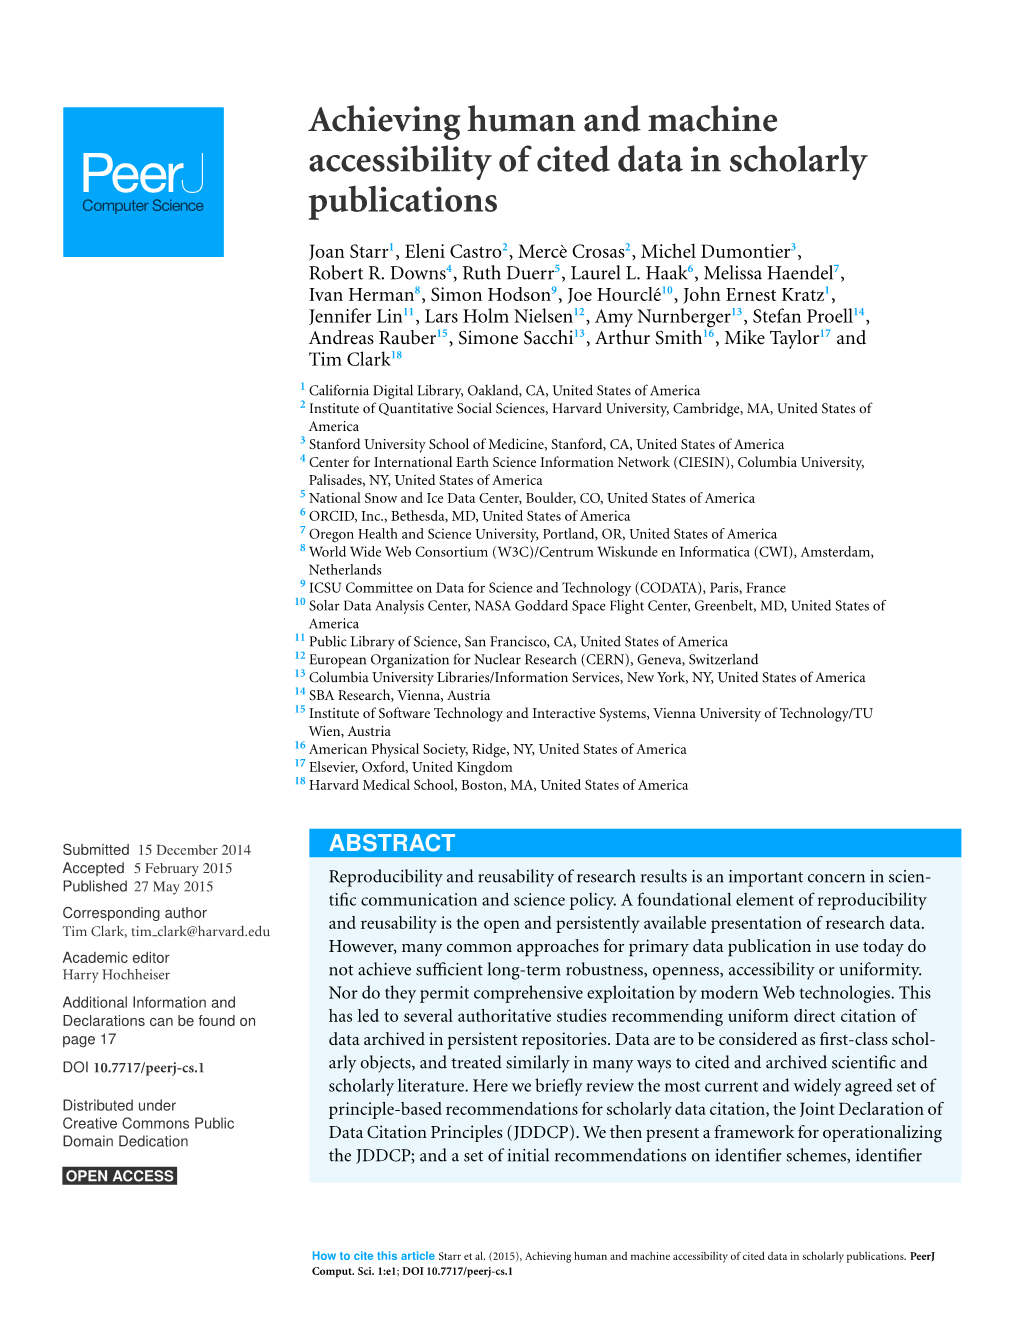 Achieving Human and Machine Accessibility of Cited Data in Scholarly Publications